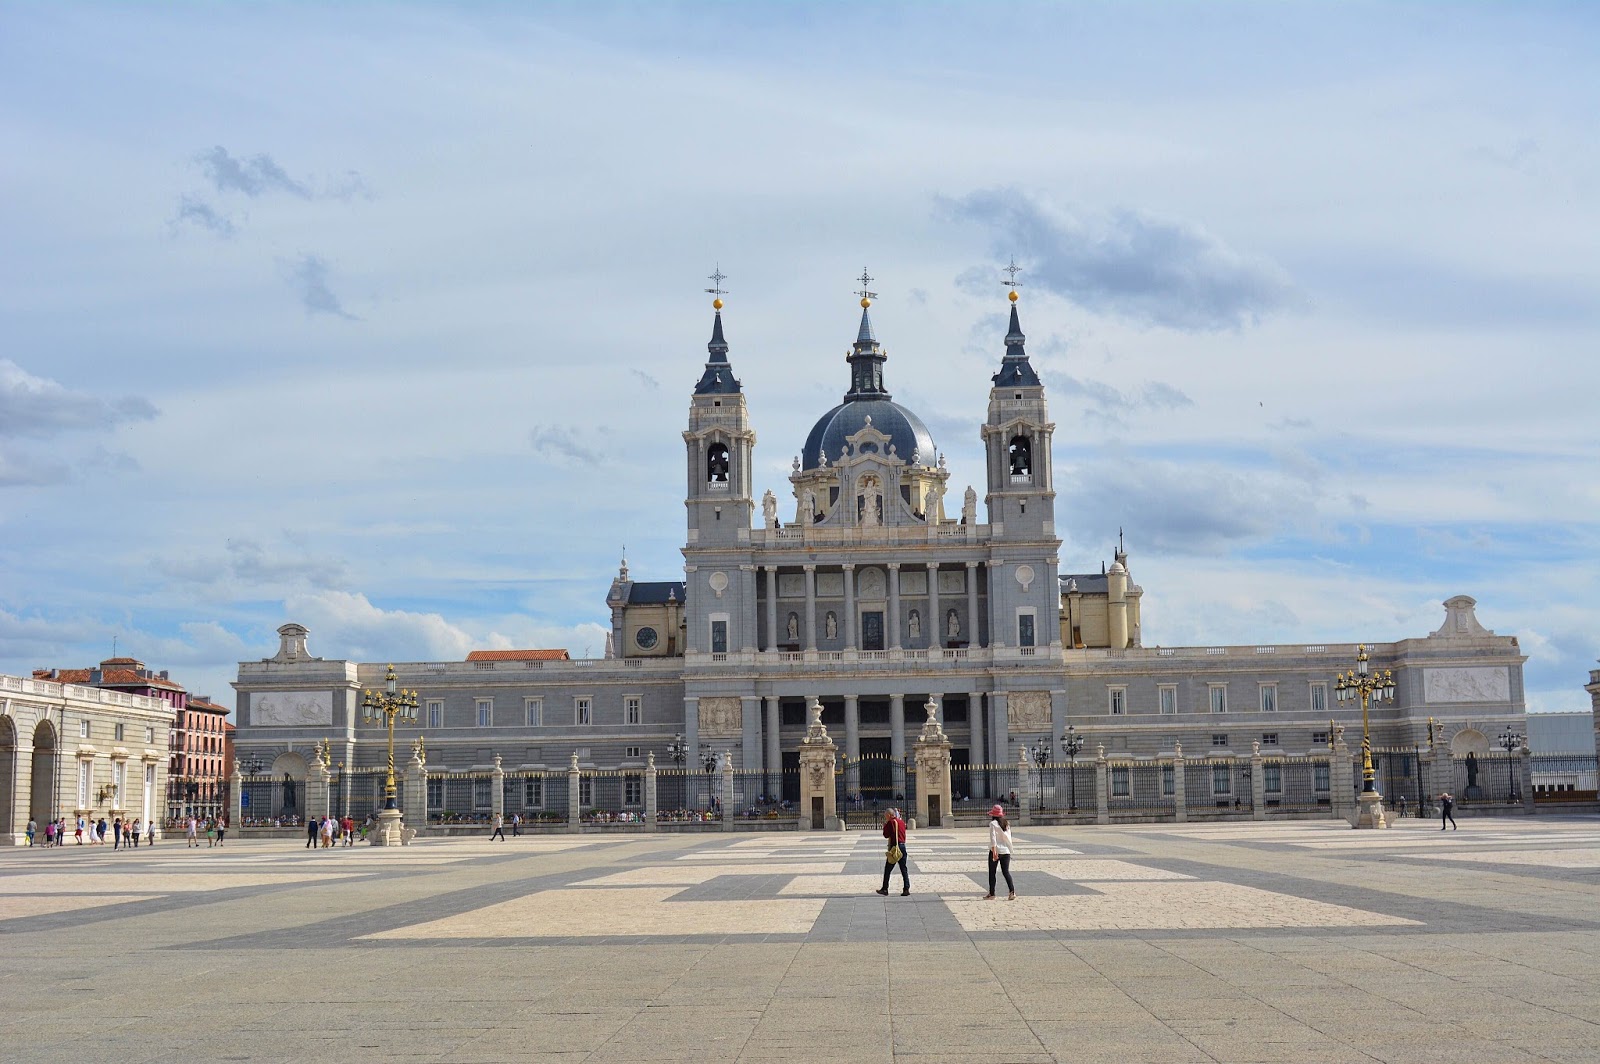 A photo of the Alamduna cathedral in Madrid, Spain. One of my favorite stops during my 6 weeks in Europe trip